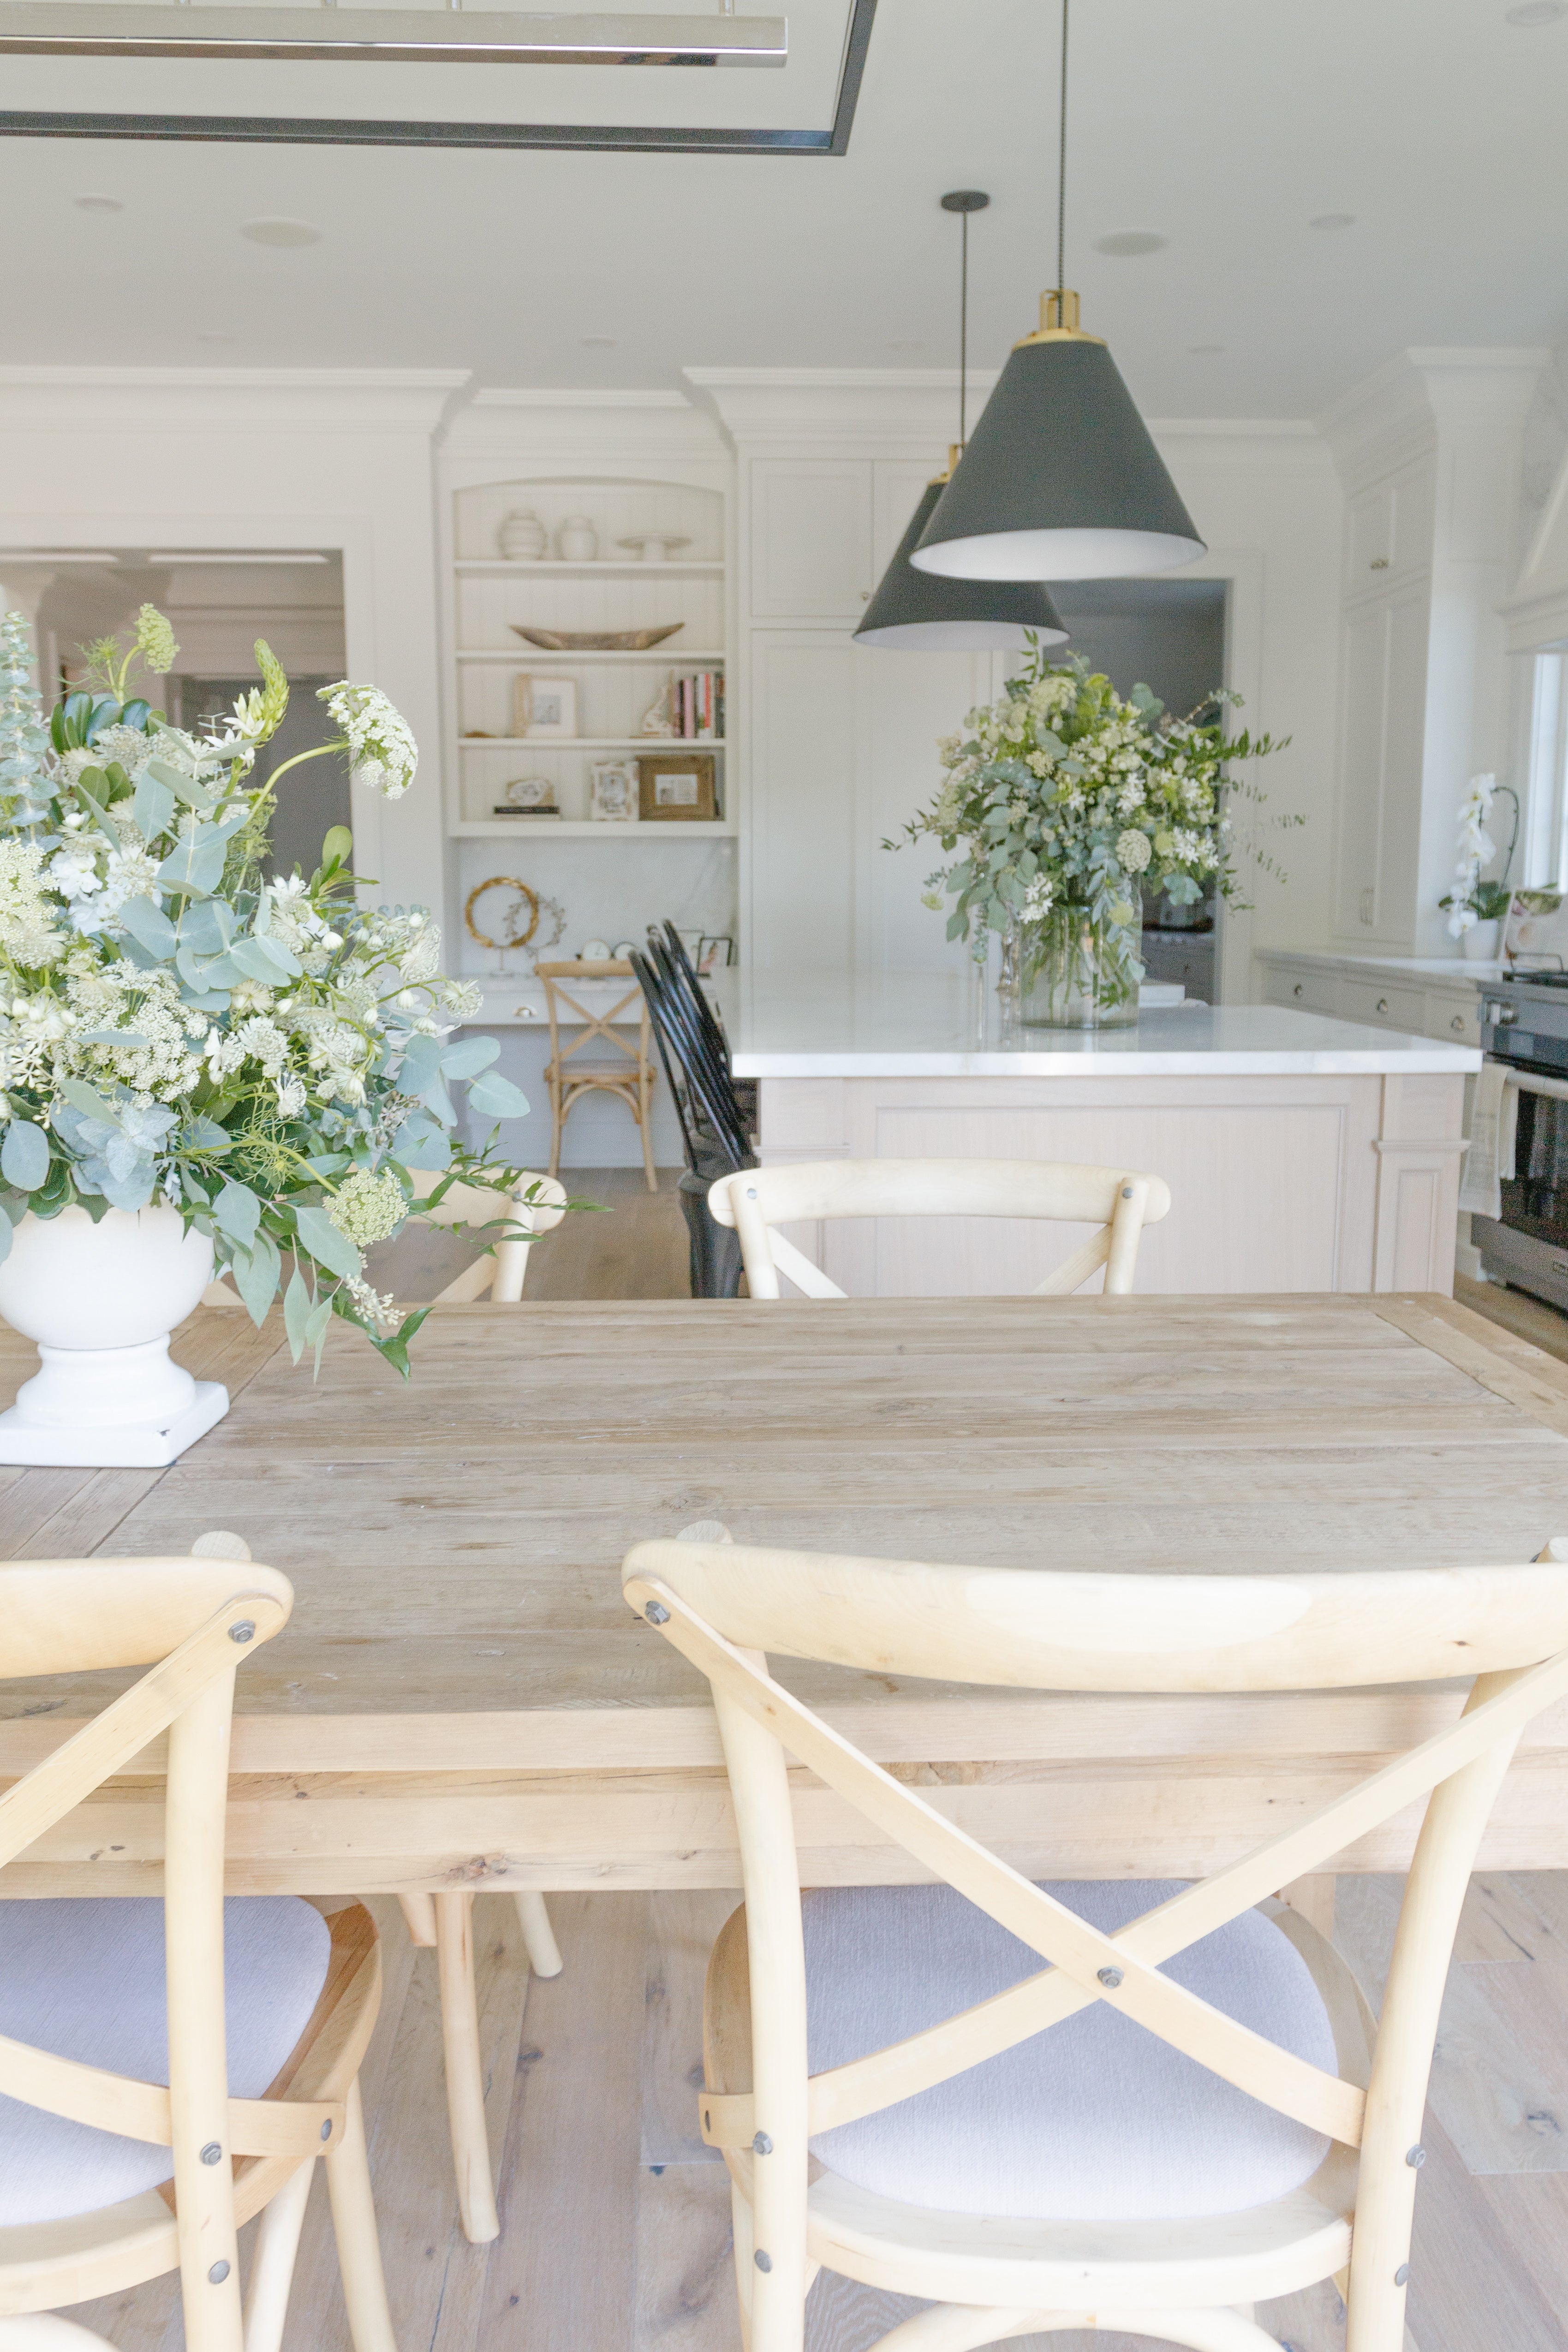 wood table and chairs in a white kitchen